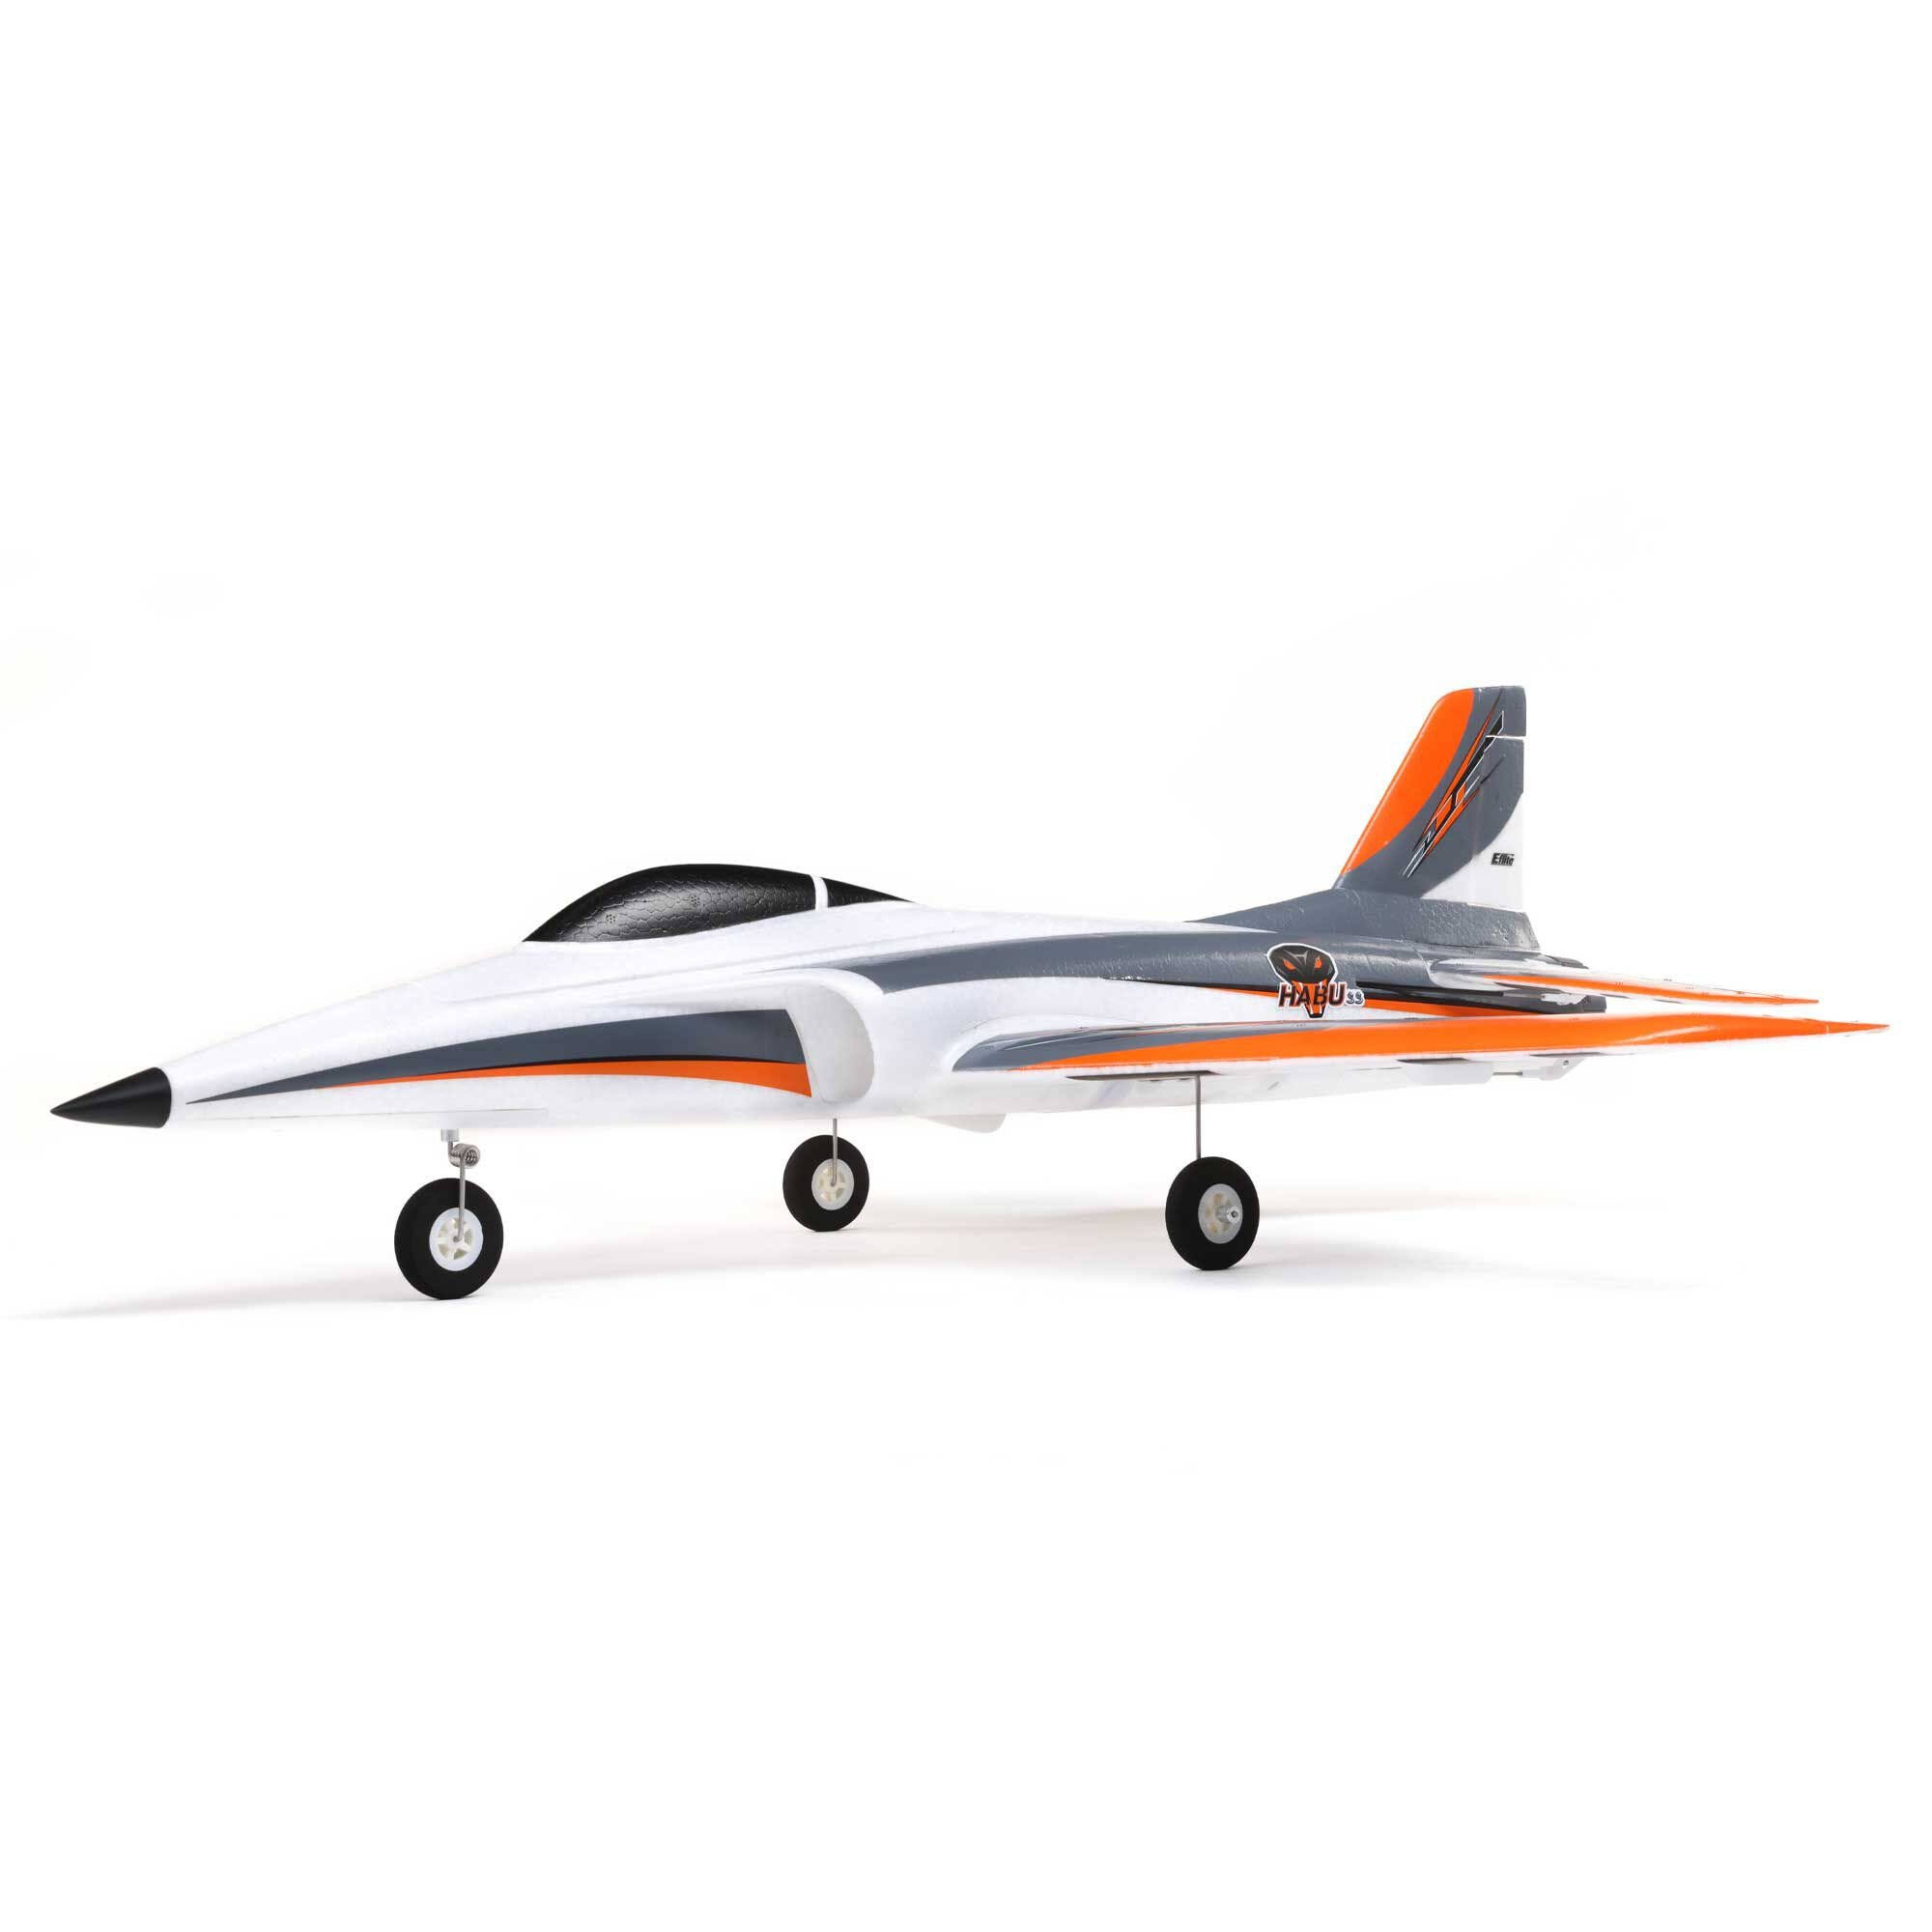 E-flite RC Airplane Habu SS (Super Sport) 50mm EDF Jet BNF Basic (Transmitter, Batteries and Charger Not Included) with Safe Select and AS3X,